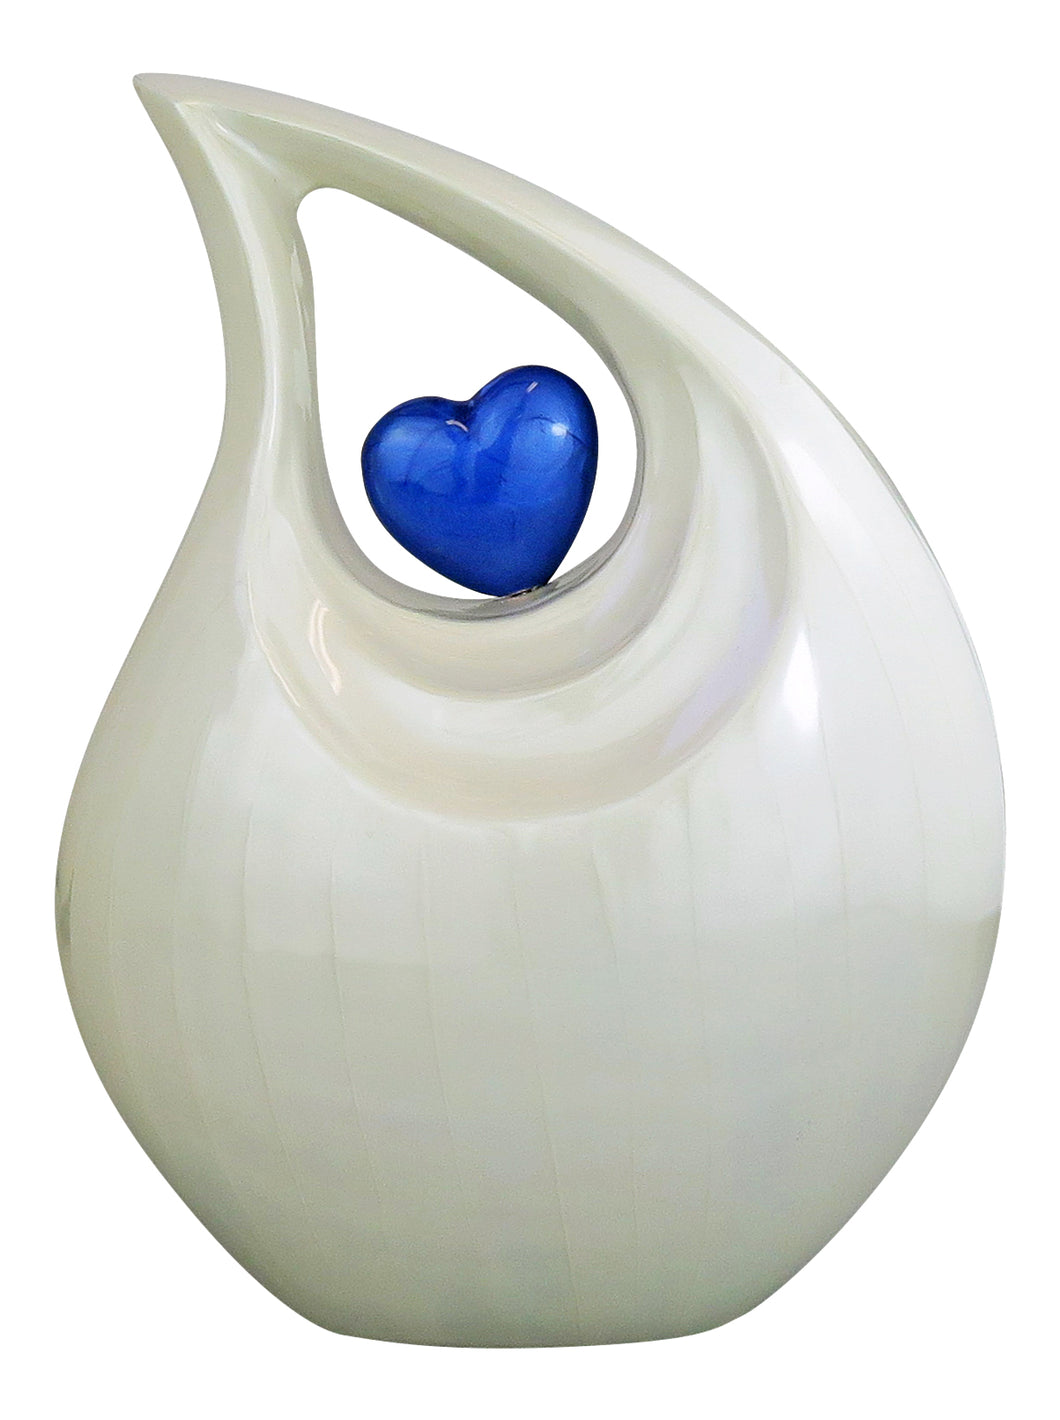 Large Pearl Enamel Heart Teardrop Adult Urn for Ashes by Love to Treasure